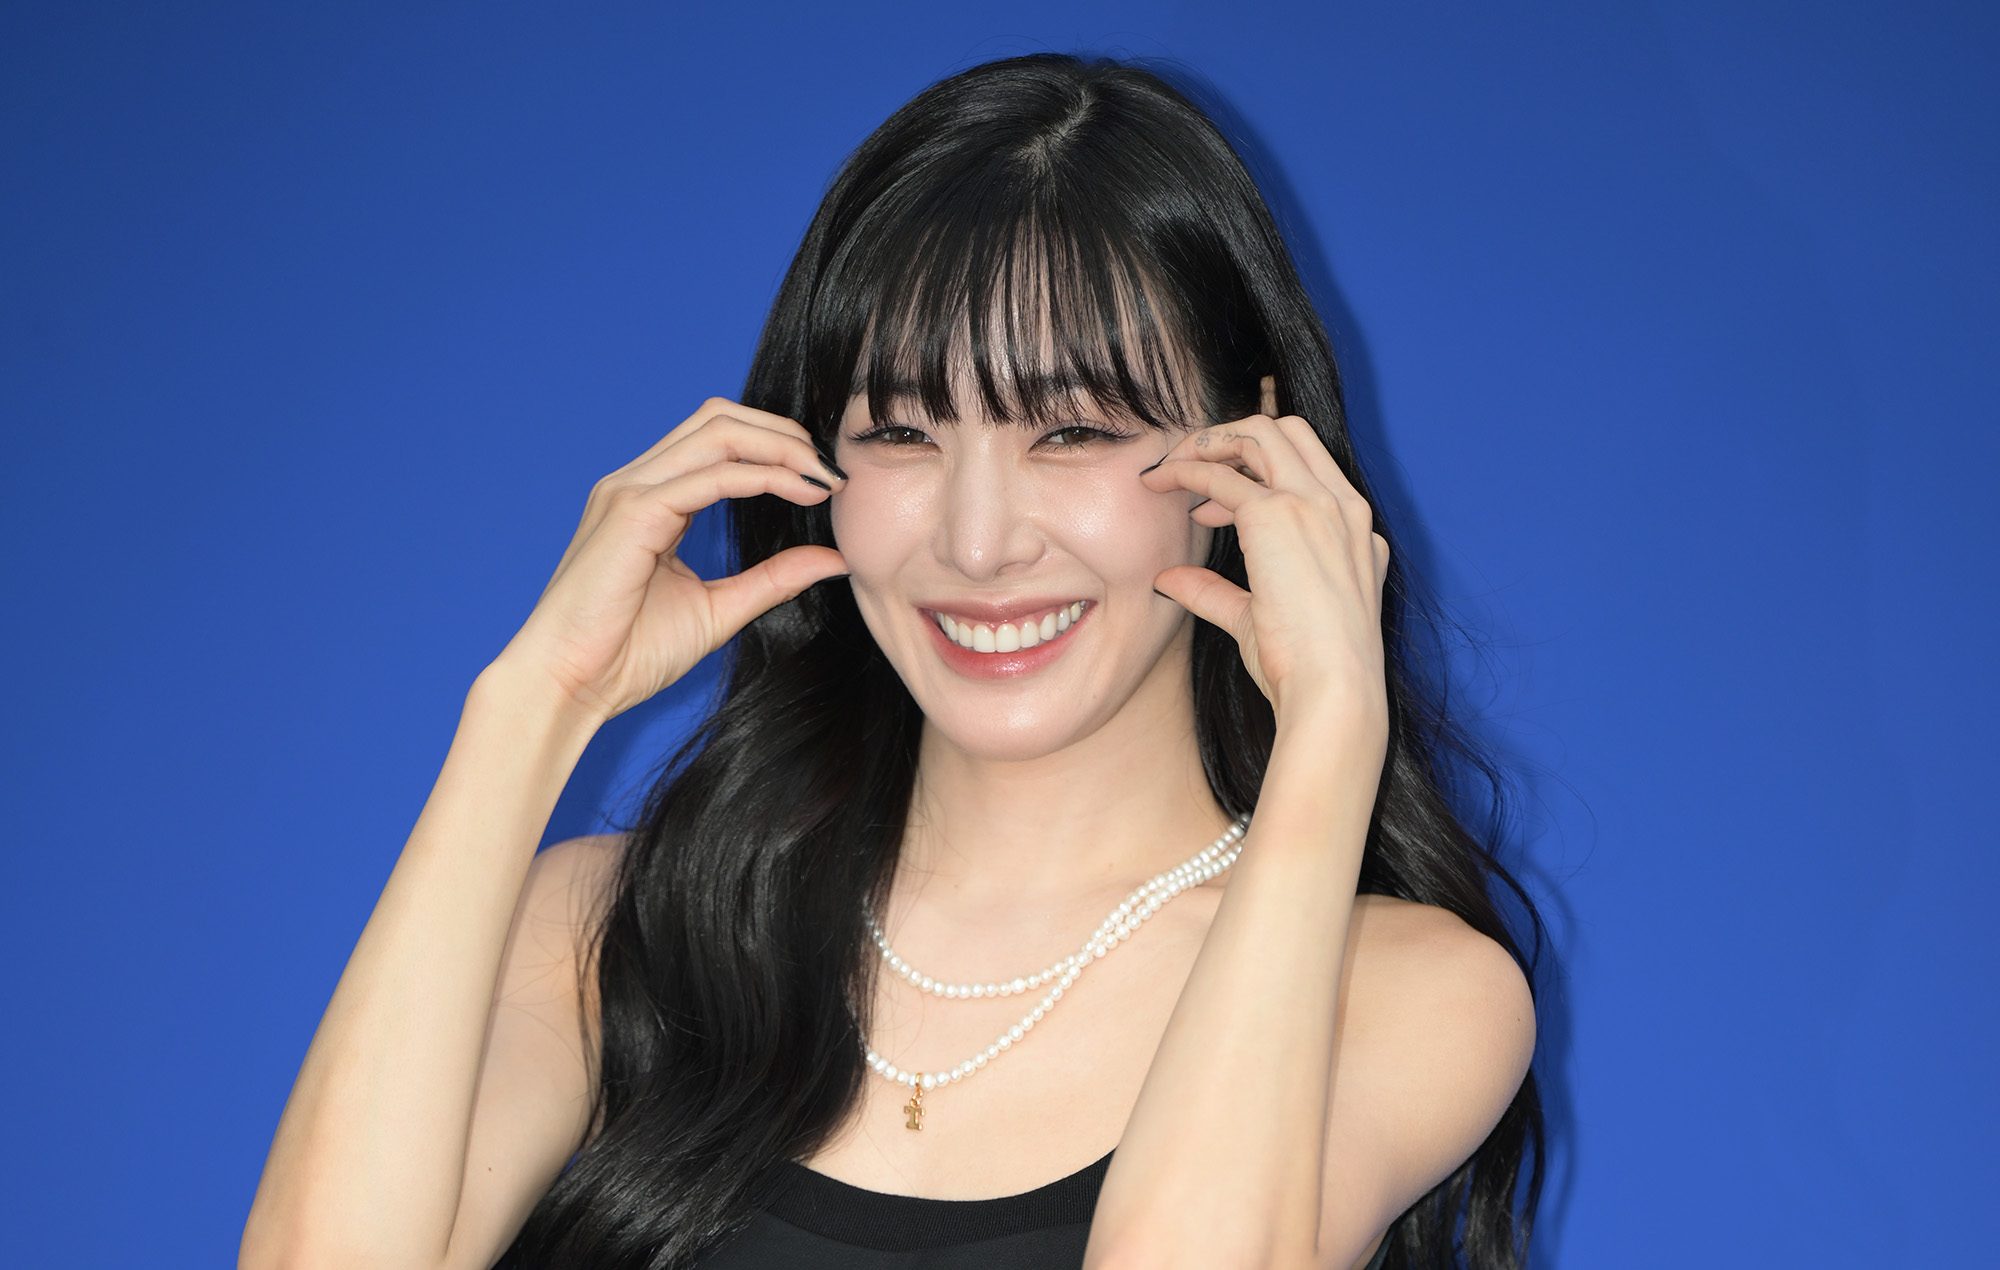 Girls’ Generation’s Tiffany Young to go on month-long break due to “ongoing health reasons”